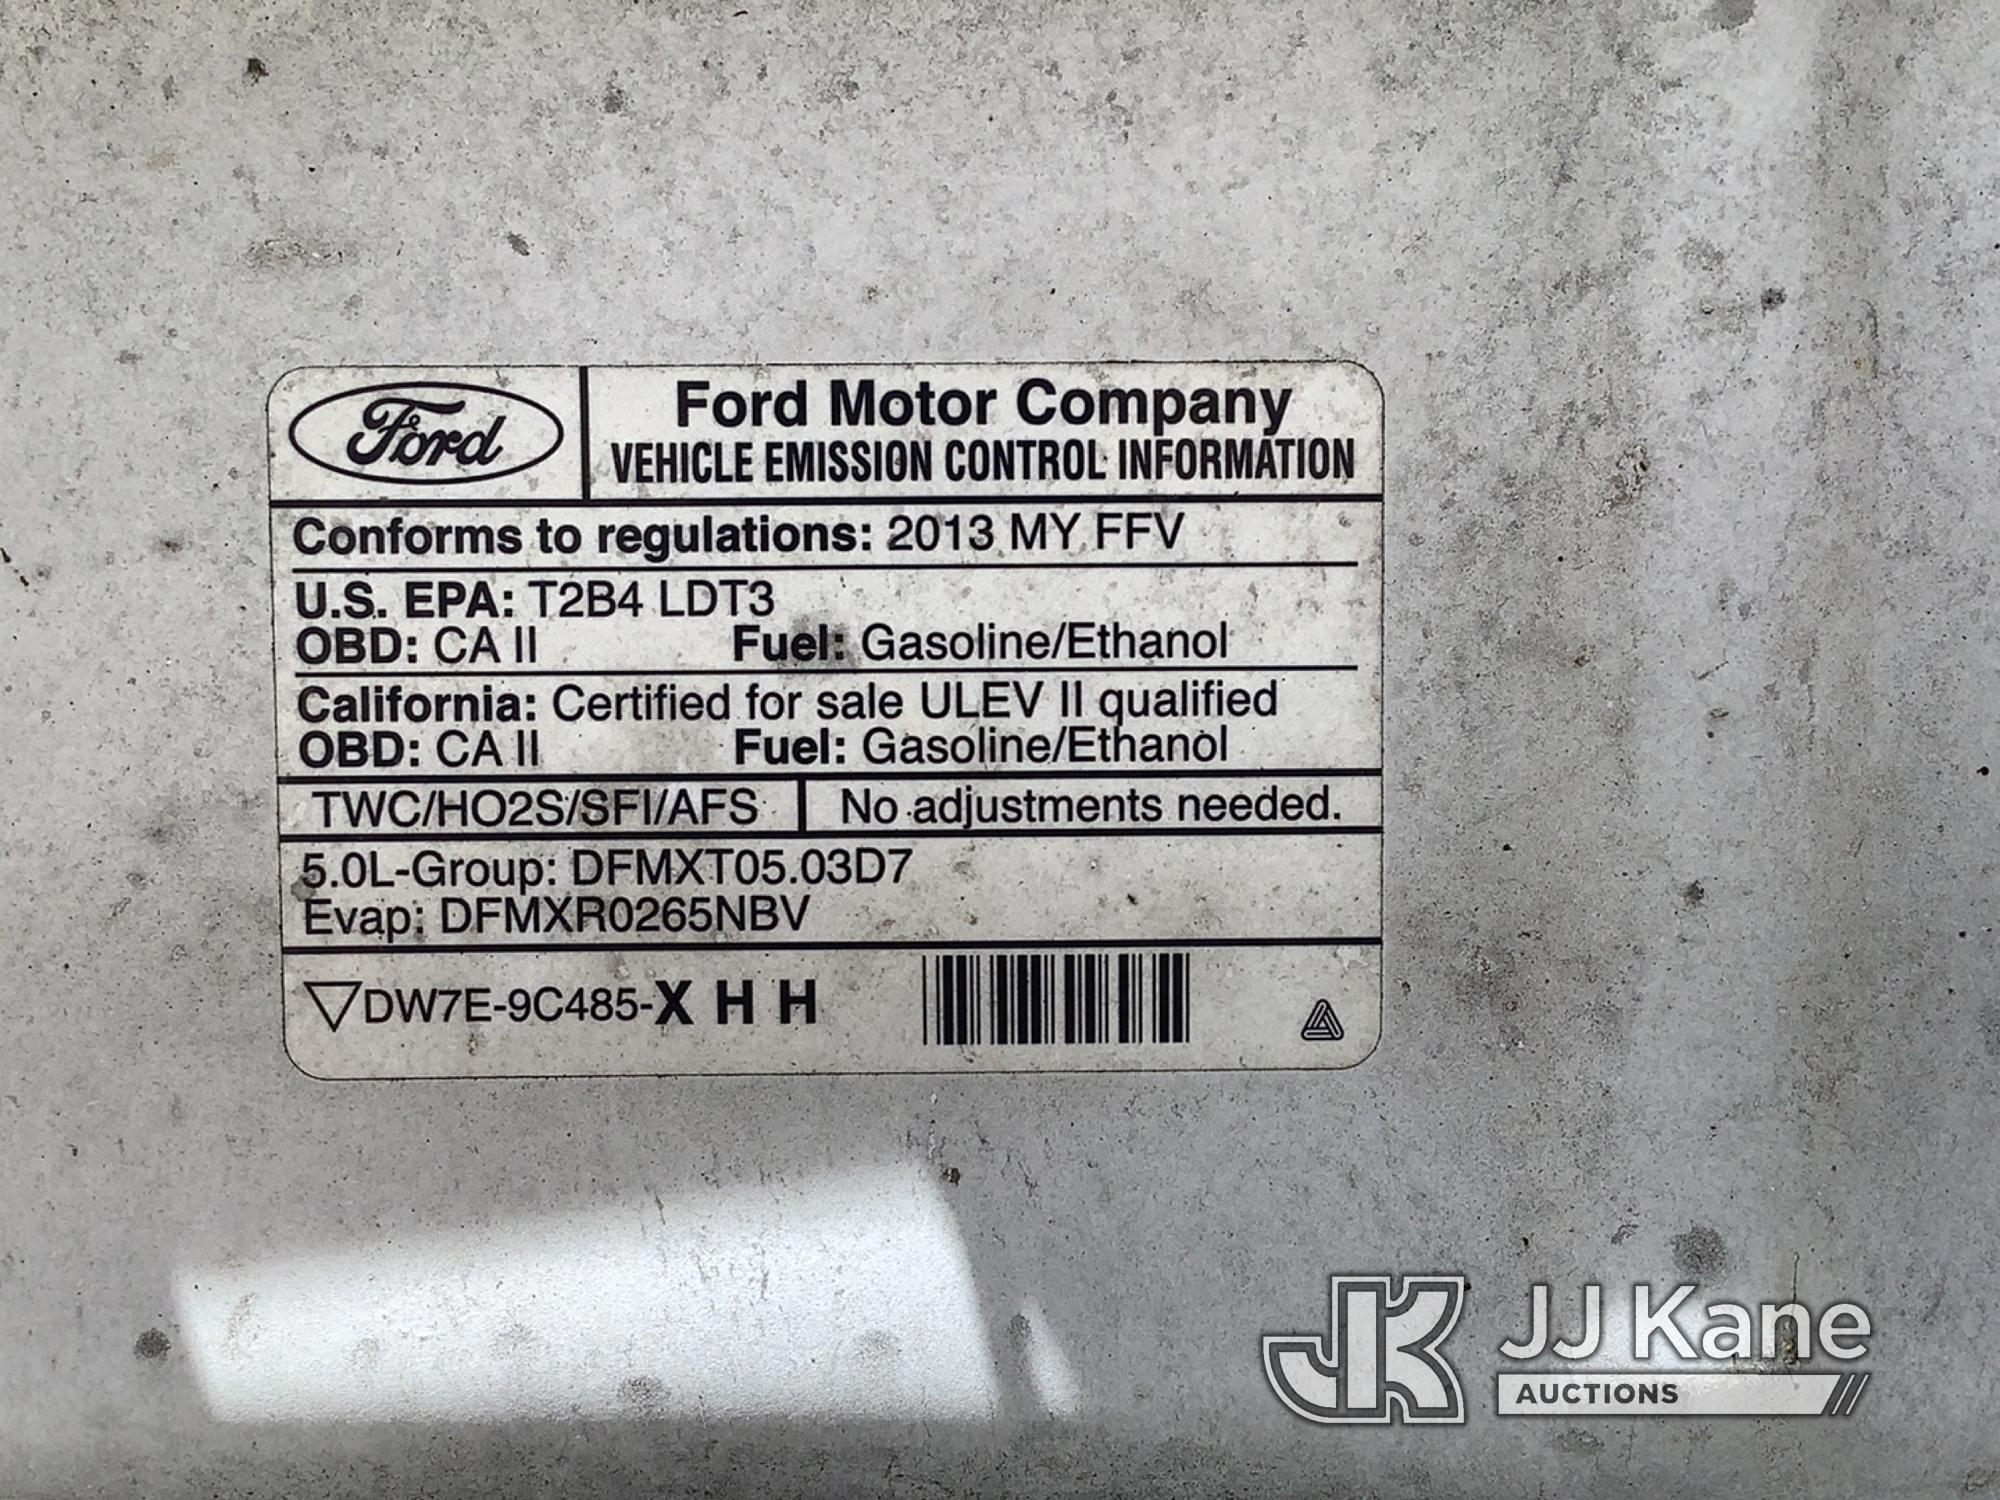 (Harmans, MD) 2013 Ford F150 4x4 Extended-Cab Pickup Truck Runs & Moves, Rust & Body Damage